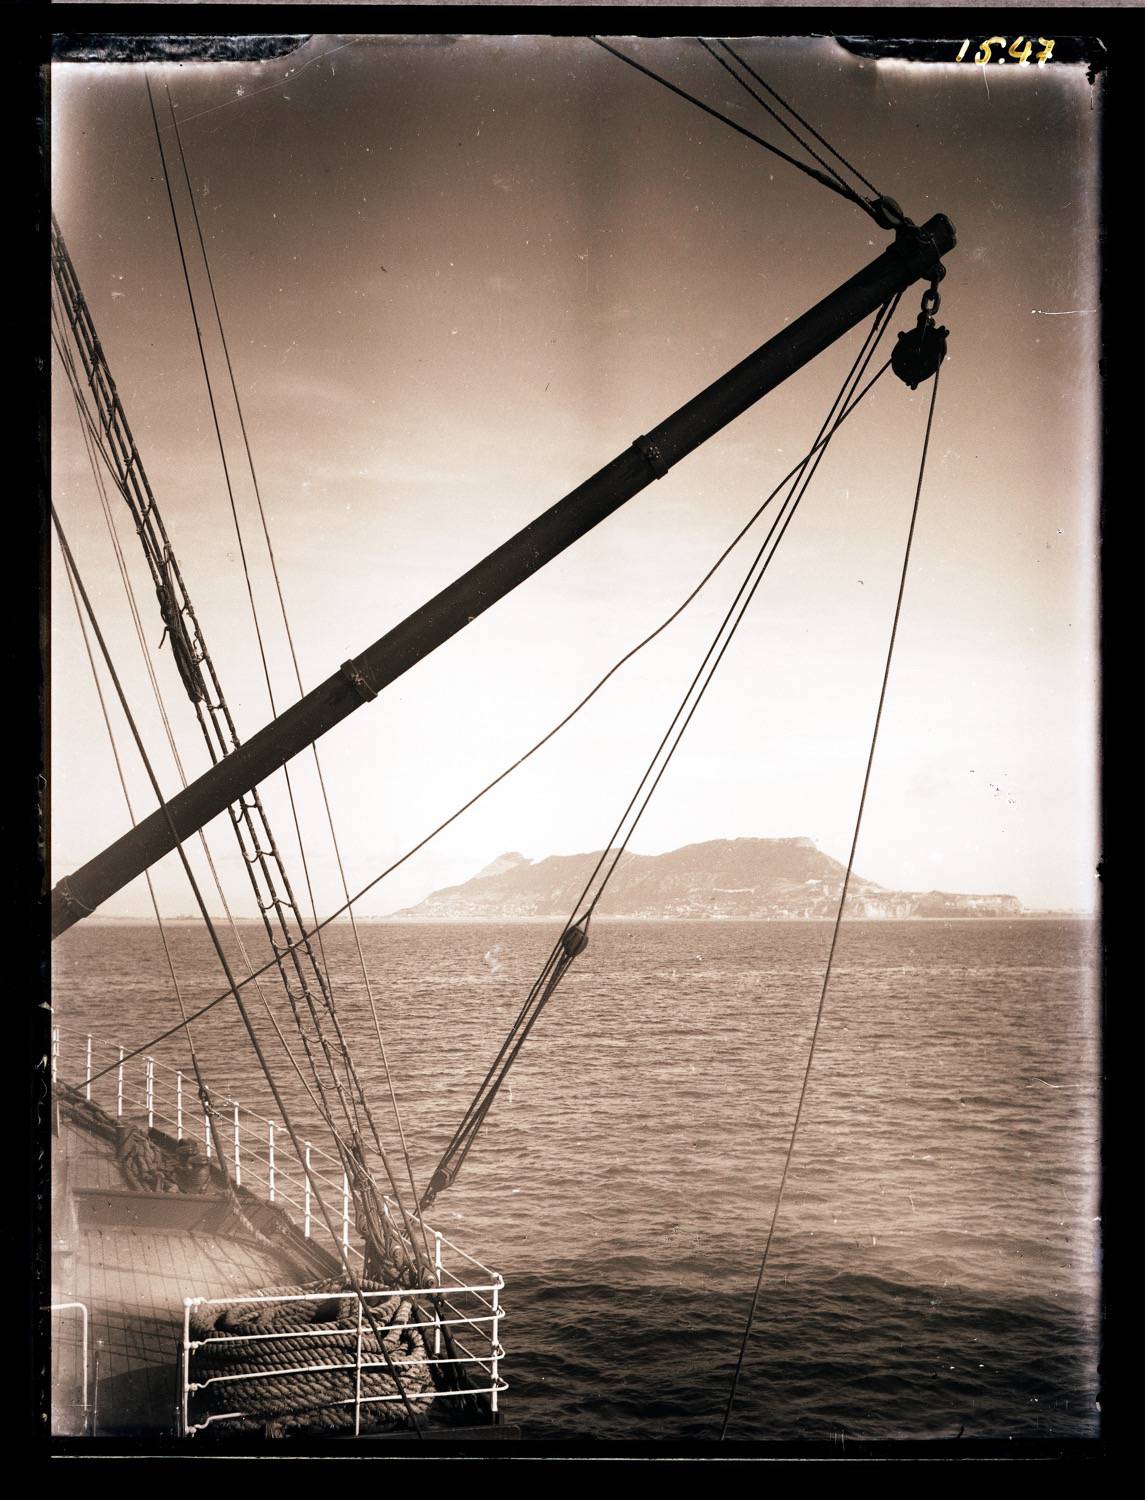 View of the Rock of Gibraltar past the ship's rigging in the foreground